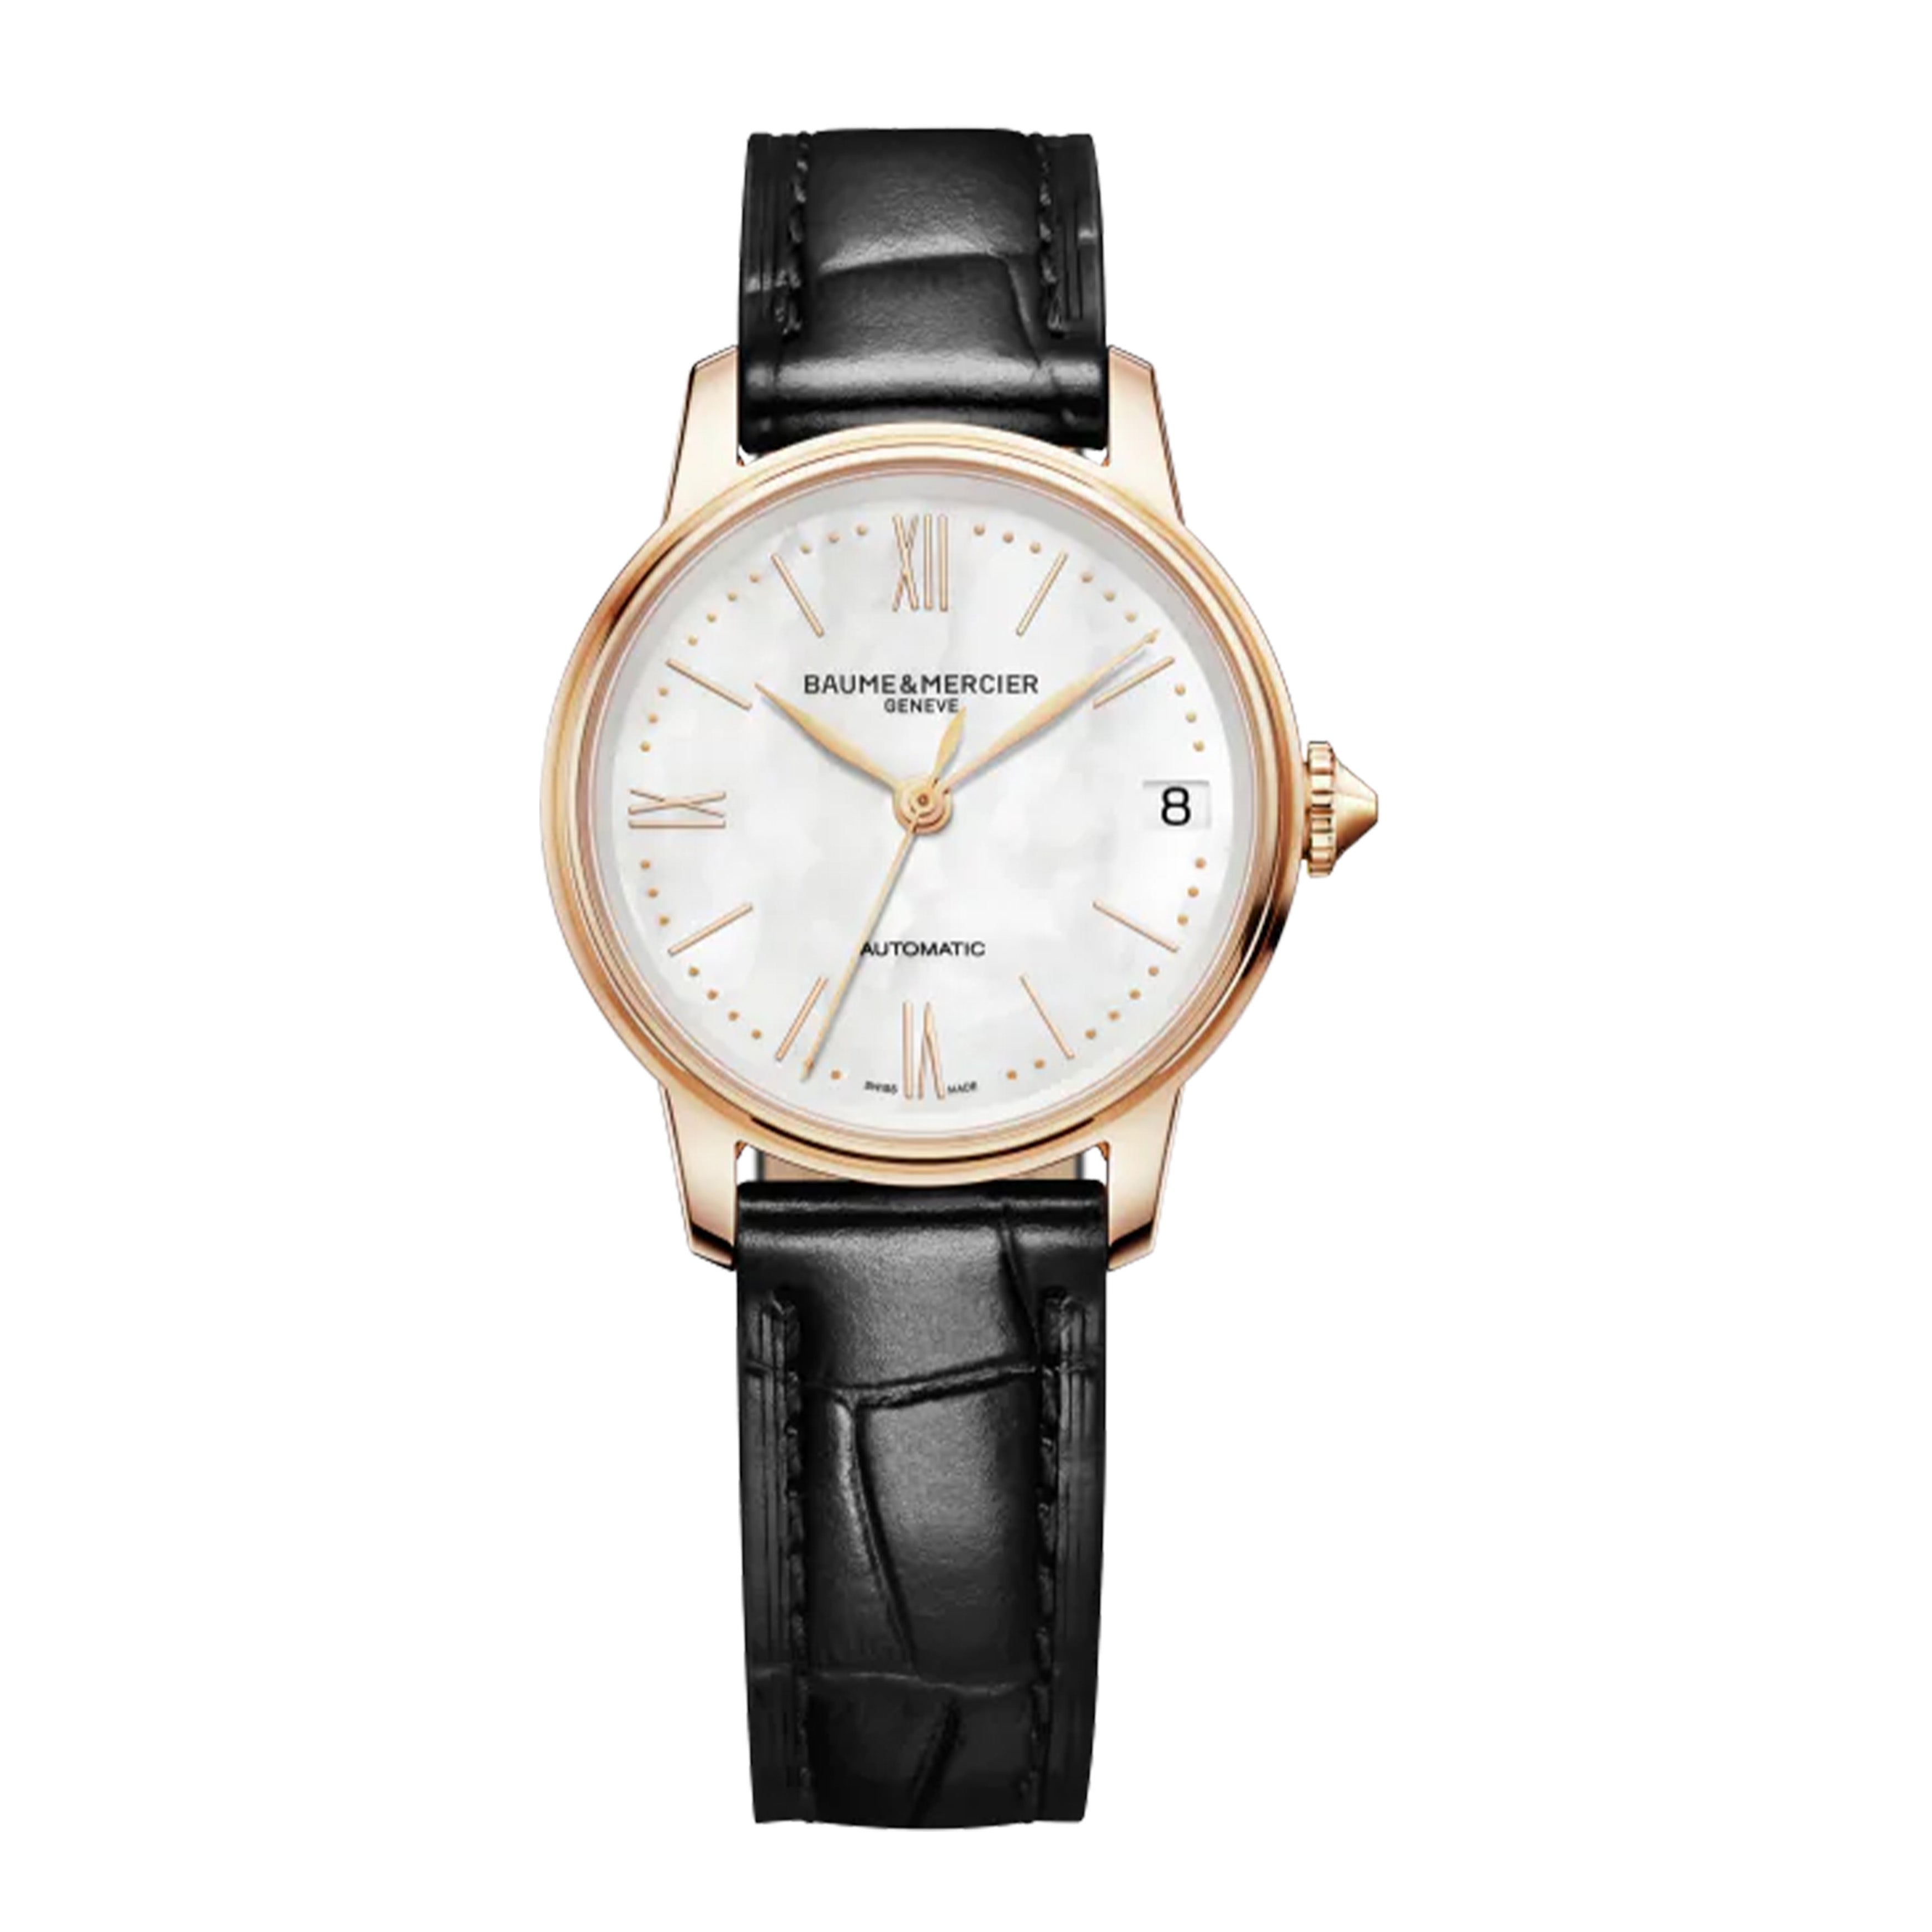 BAUME & MERCIER Classima Watch, 31MM MOTHER OF PEARL DIAL, 10598